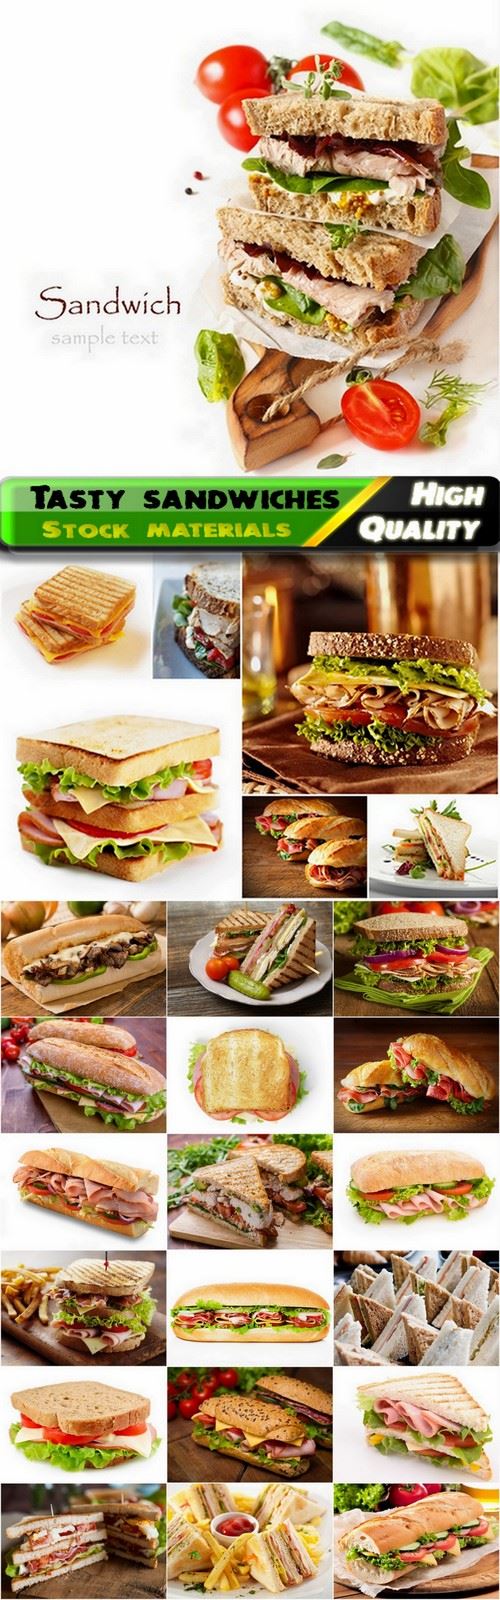 Tasty sandwiches Stock images - 25 HQ Jpg